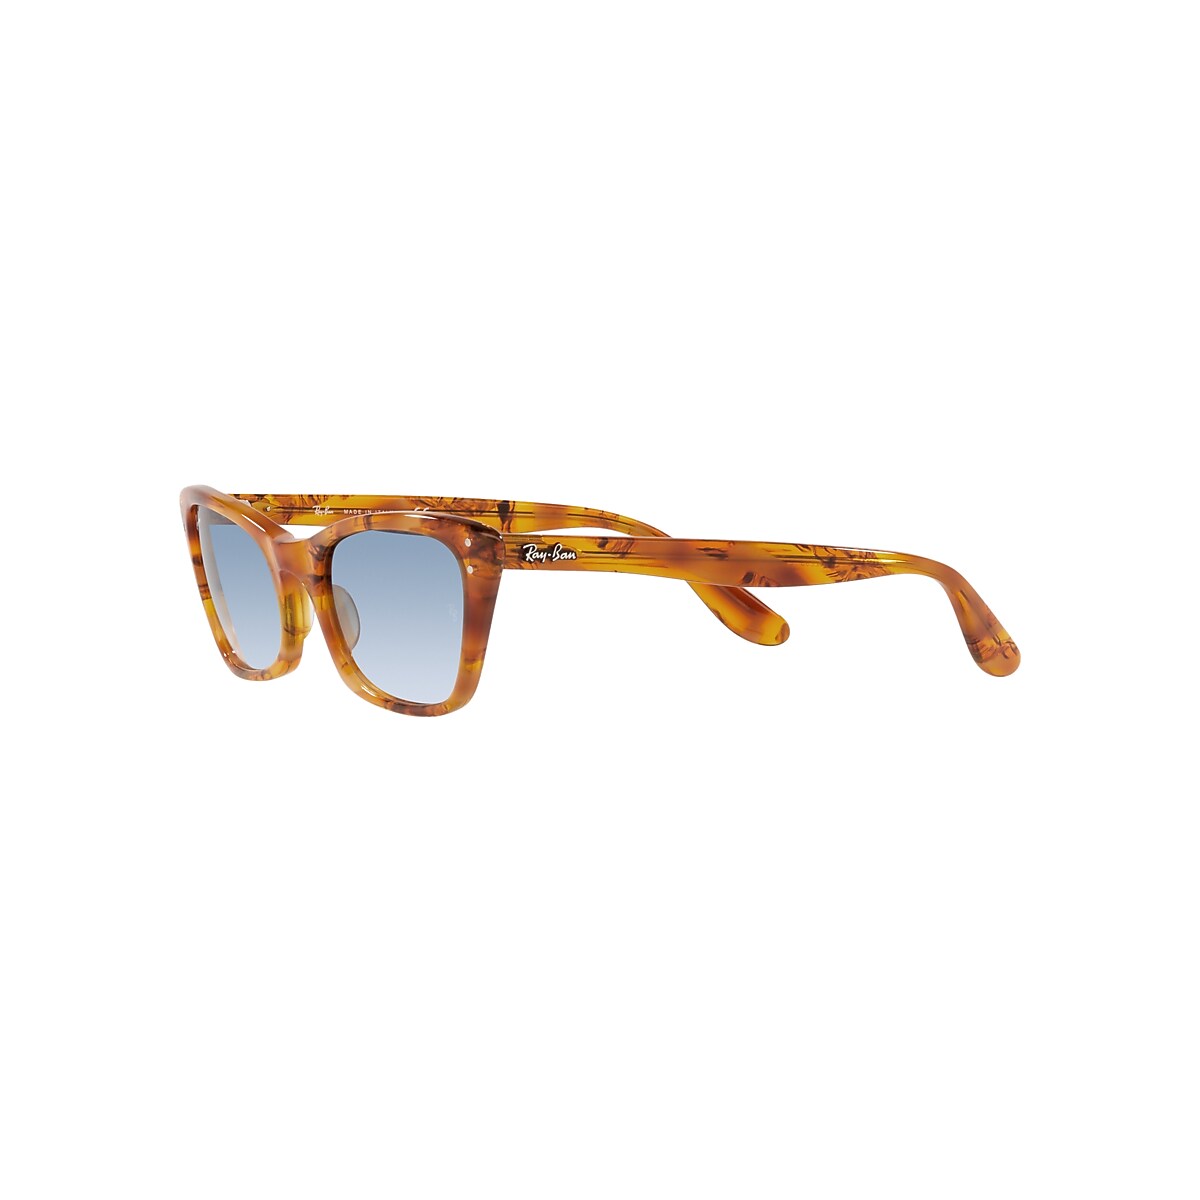 LADY BURBANK Sunglasses in Amber Tortoise and Blue - Ray-Ban